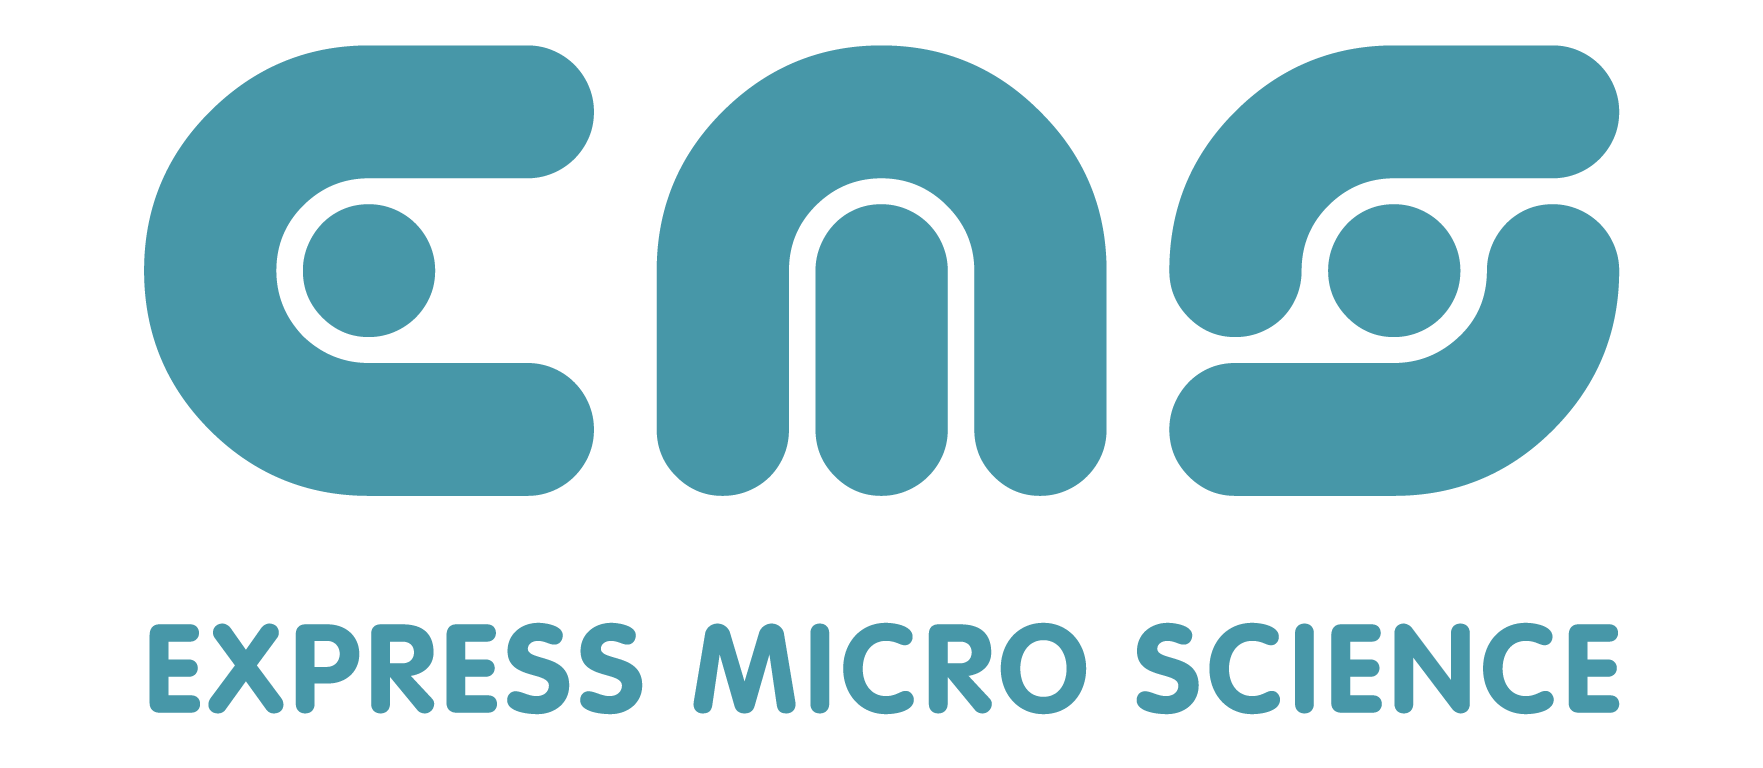 Express Micro Science